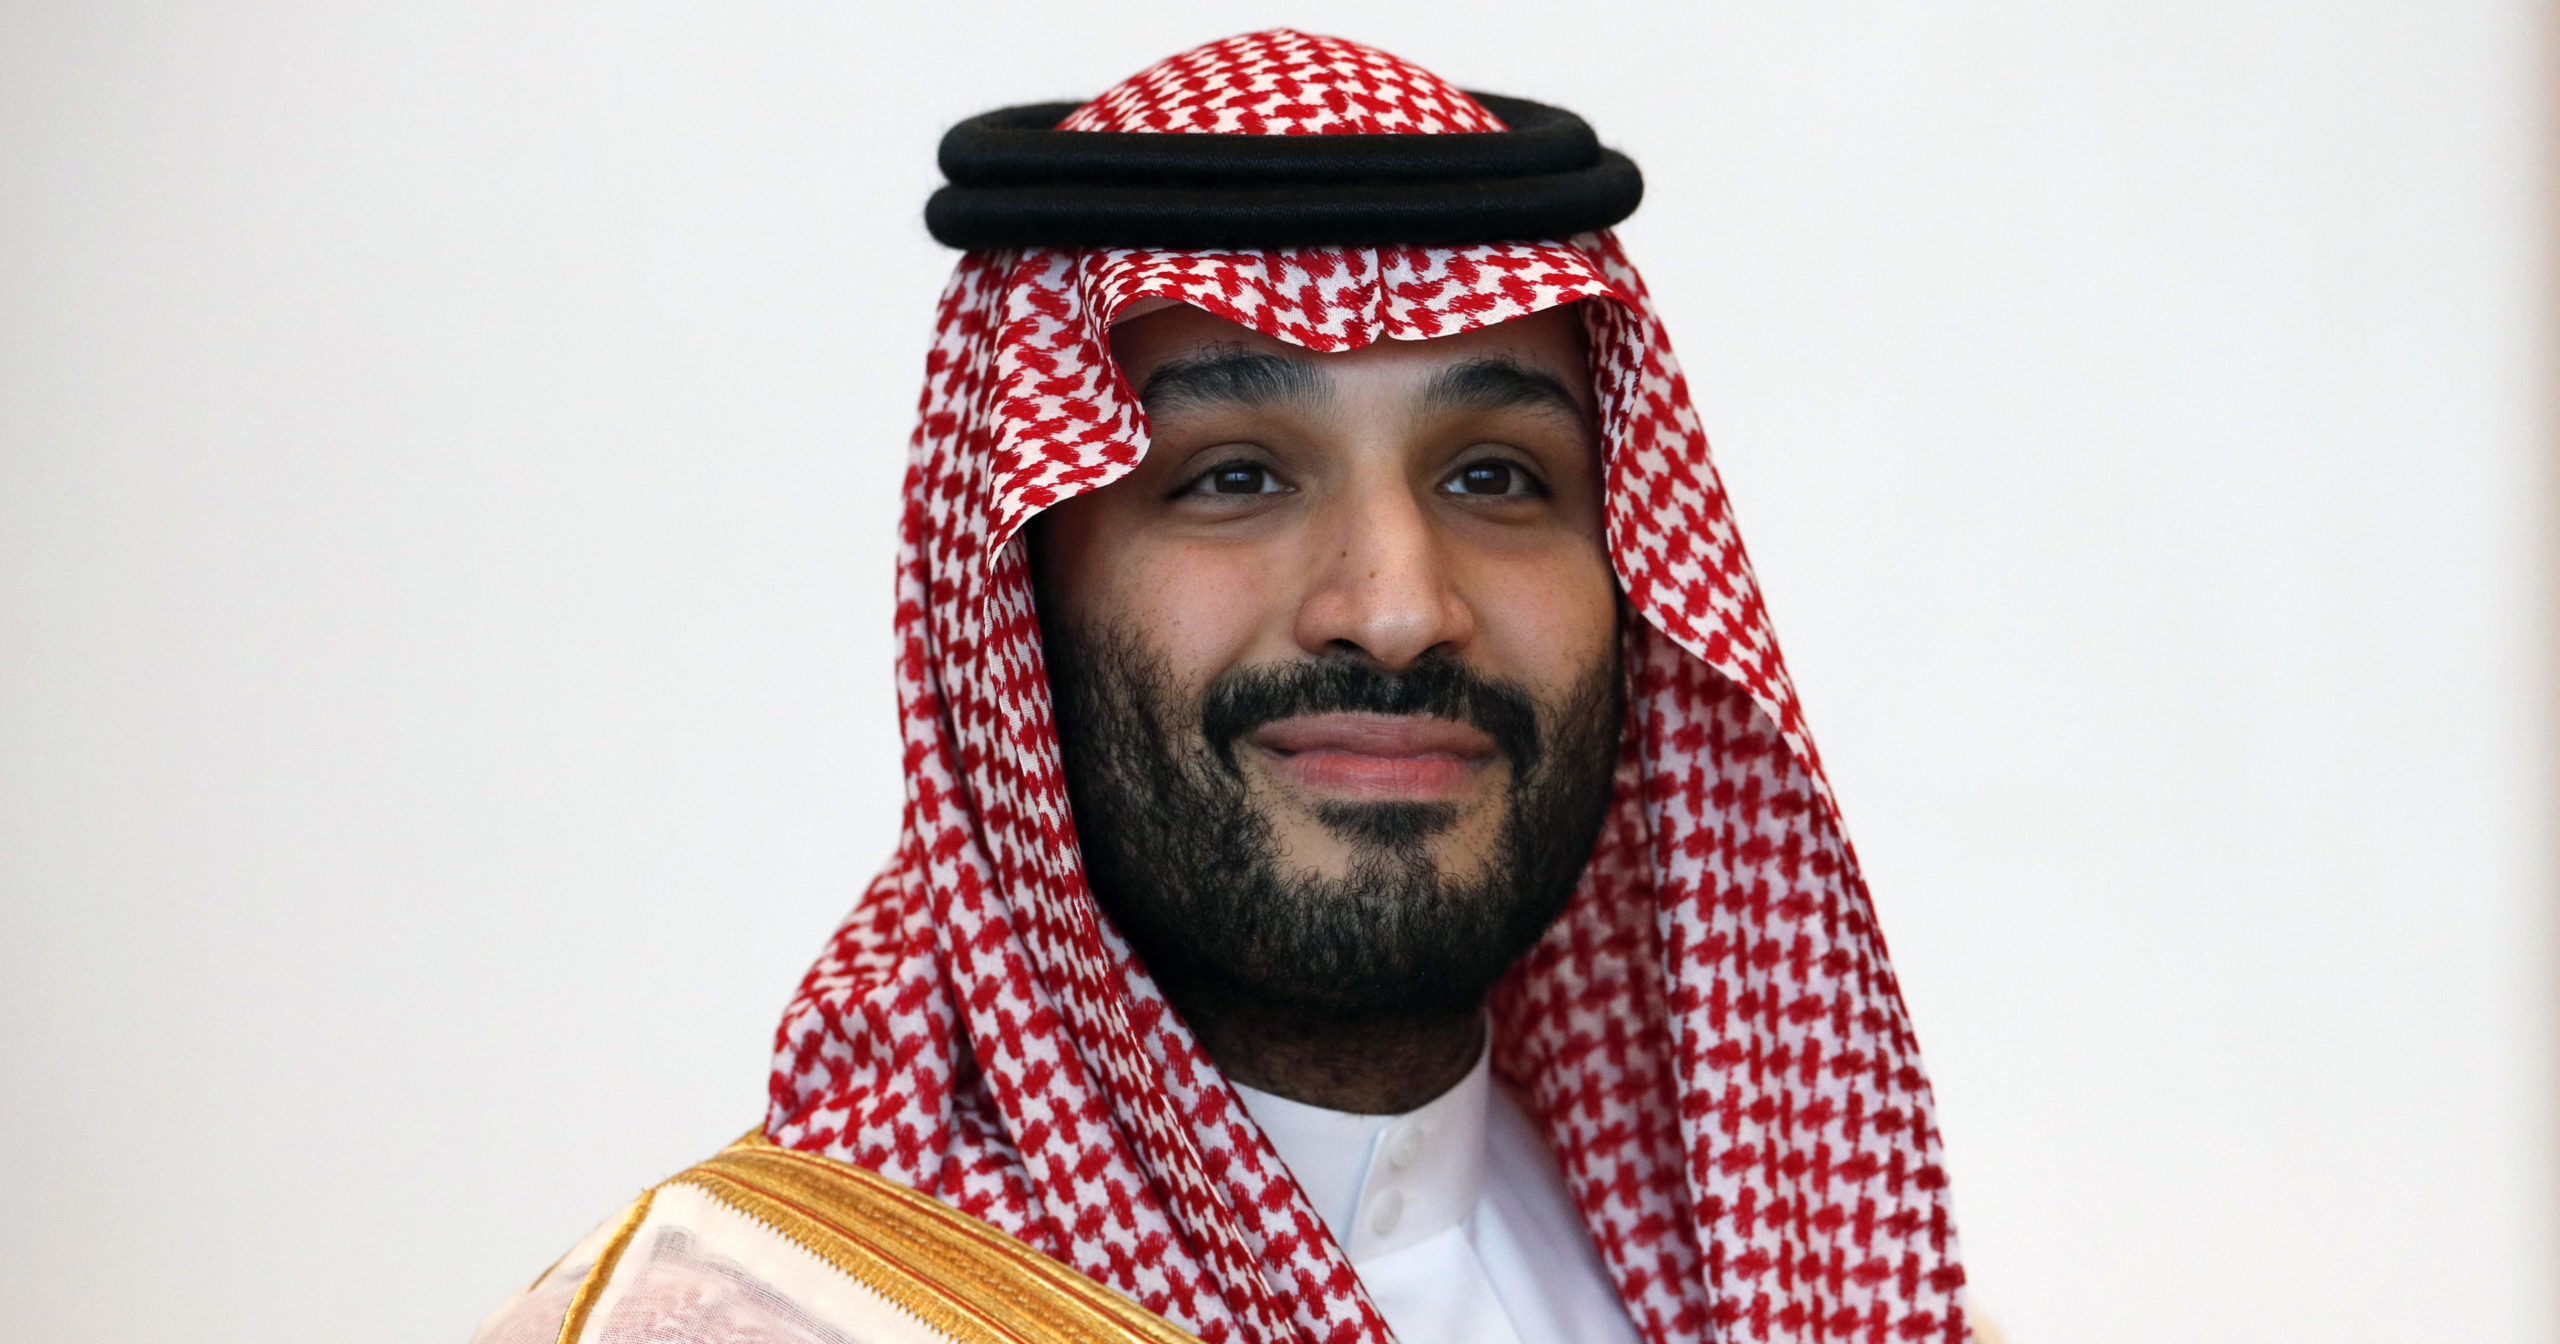 Saudi Crown Prince Mohammed bin Salman attends the APEC Leader's Informal Dialogue with guests as part of the APEC summit in Bangkok, Thailand, on Friday.